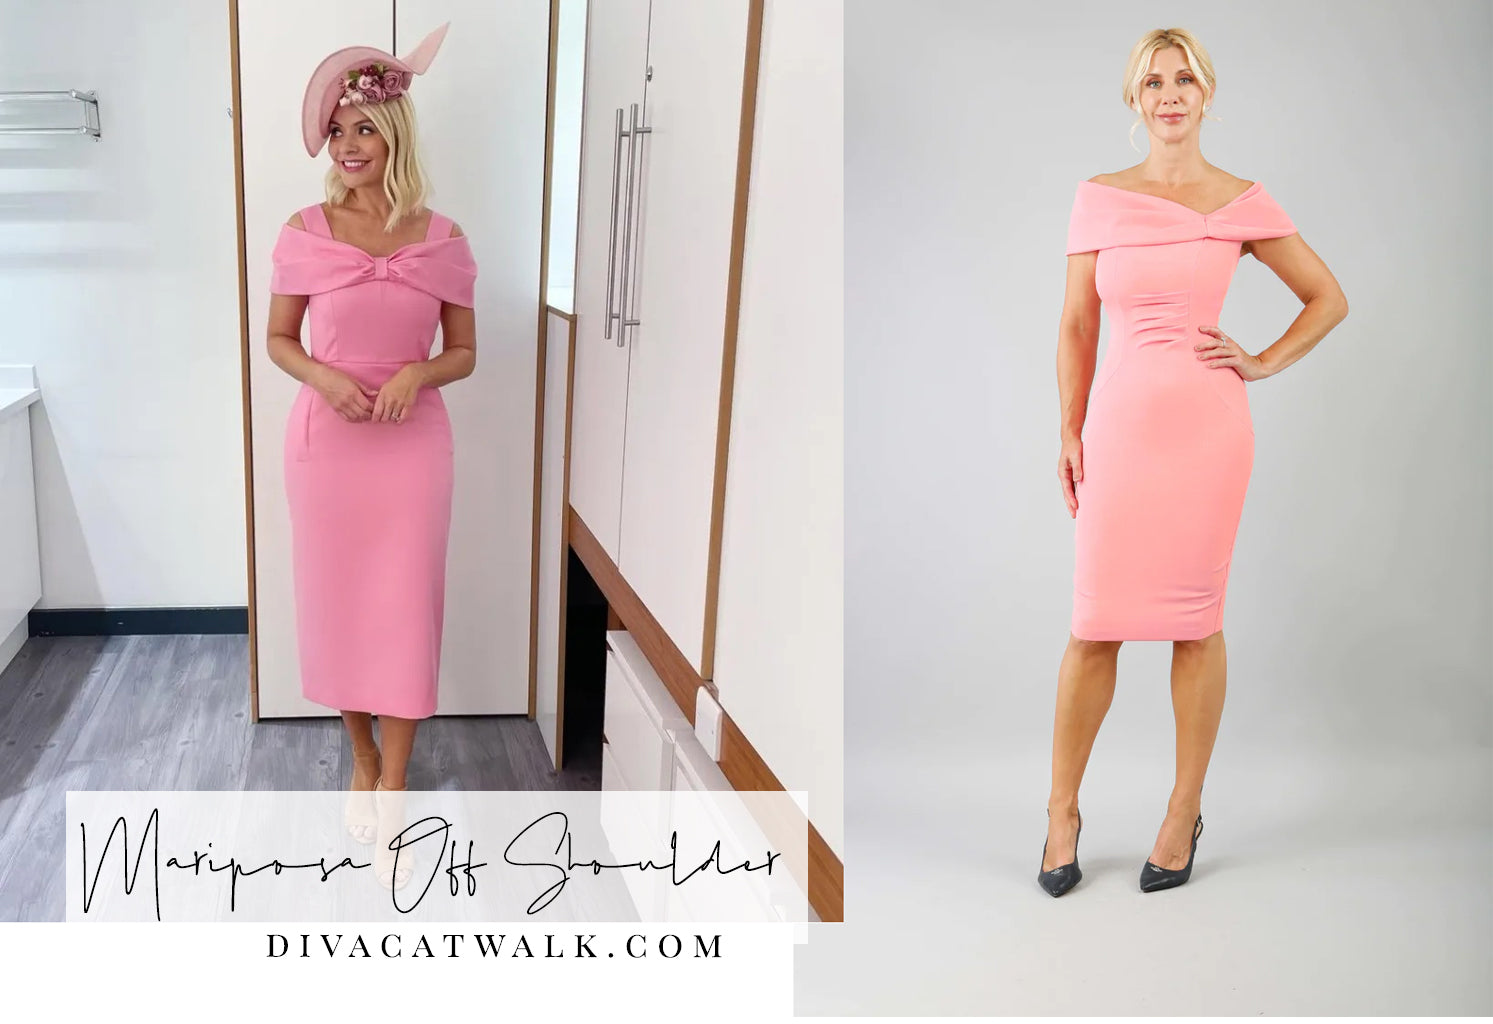 Holly Willoughby pictured wearing a pink, off-shoulder, dress. To the side is a screenshot of our Mariposa Off Shoulder dress.